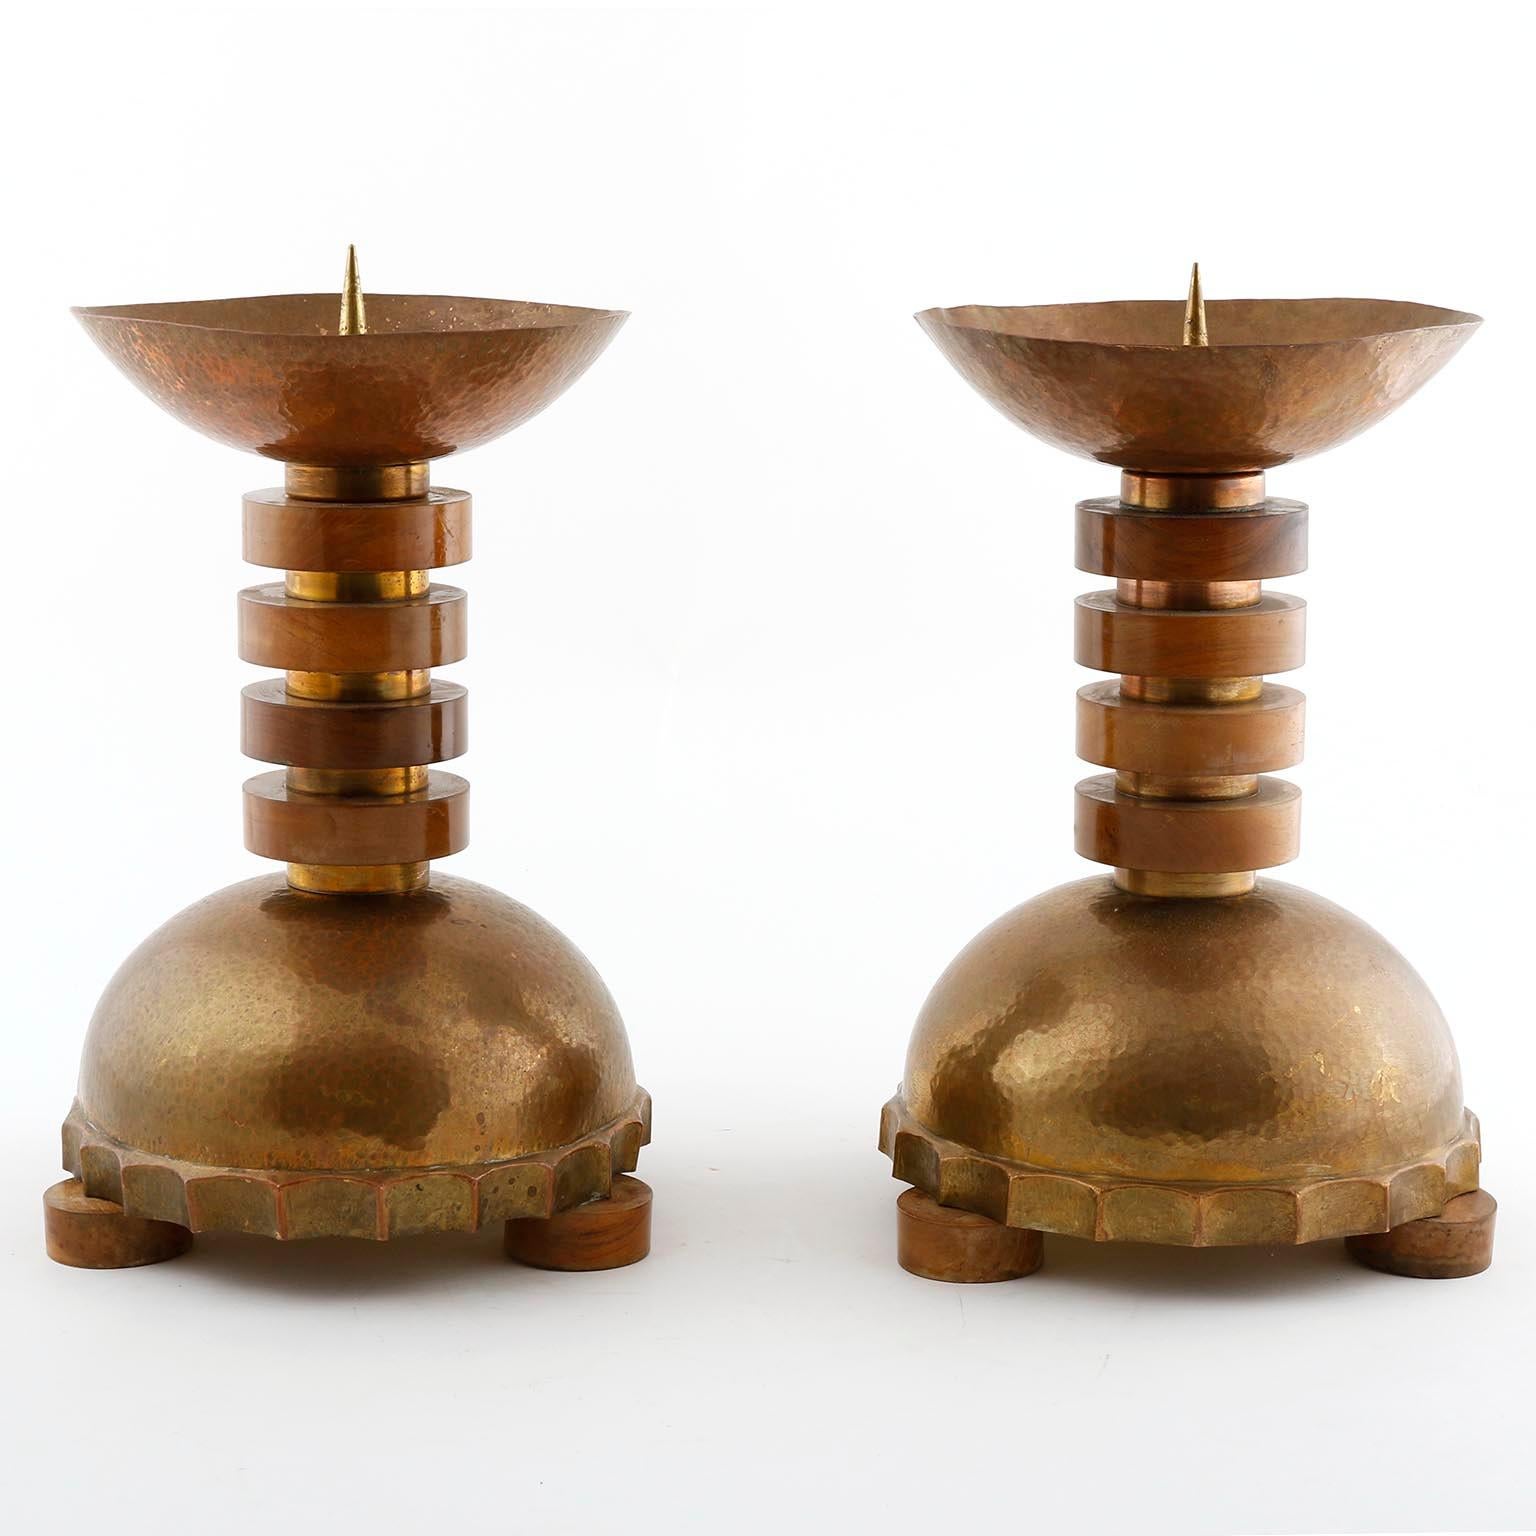 A pair of large and gorgeous candlesticks manufactured, circa 1930.
They are made of nut wood, hammered brass and copper with wonderful patina.